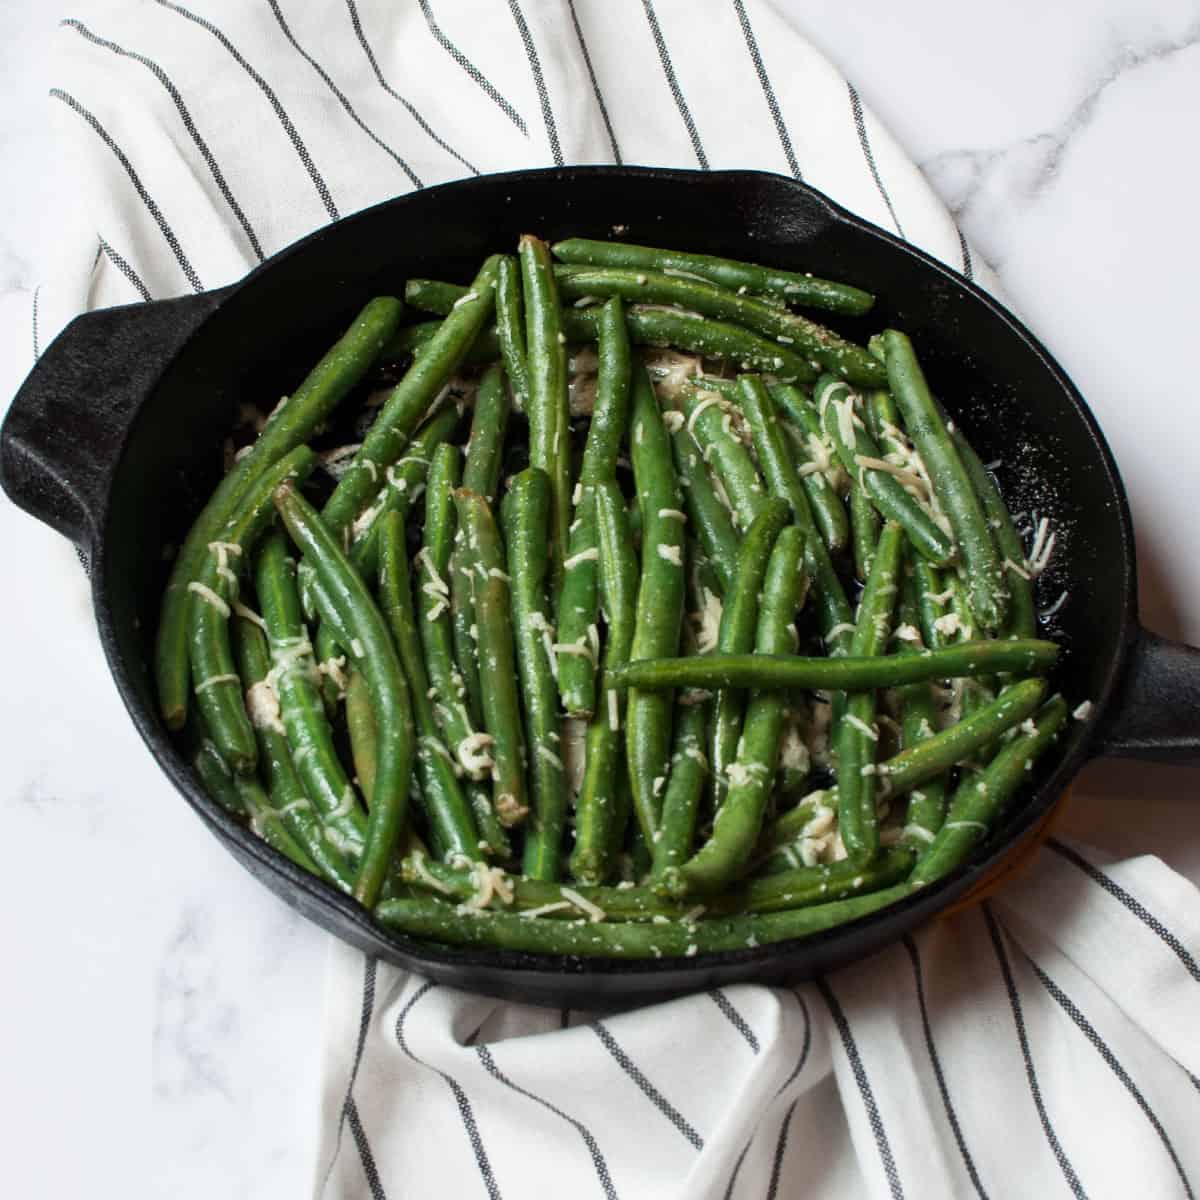 Upclose photo of green beans in a cast iron skillet with a striped linen